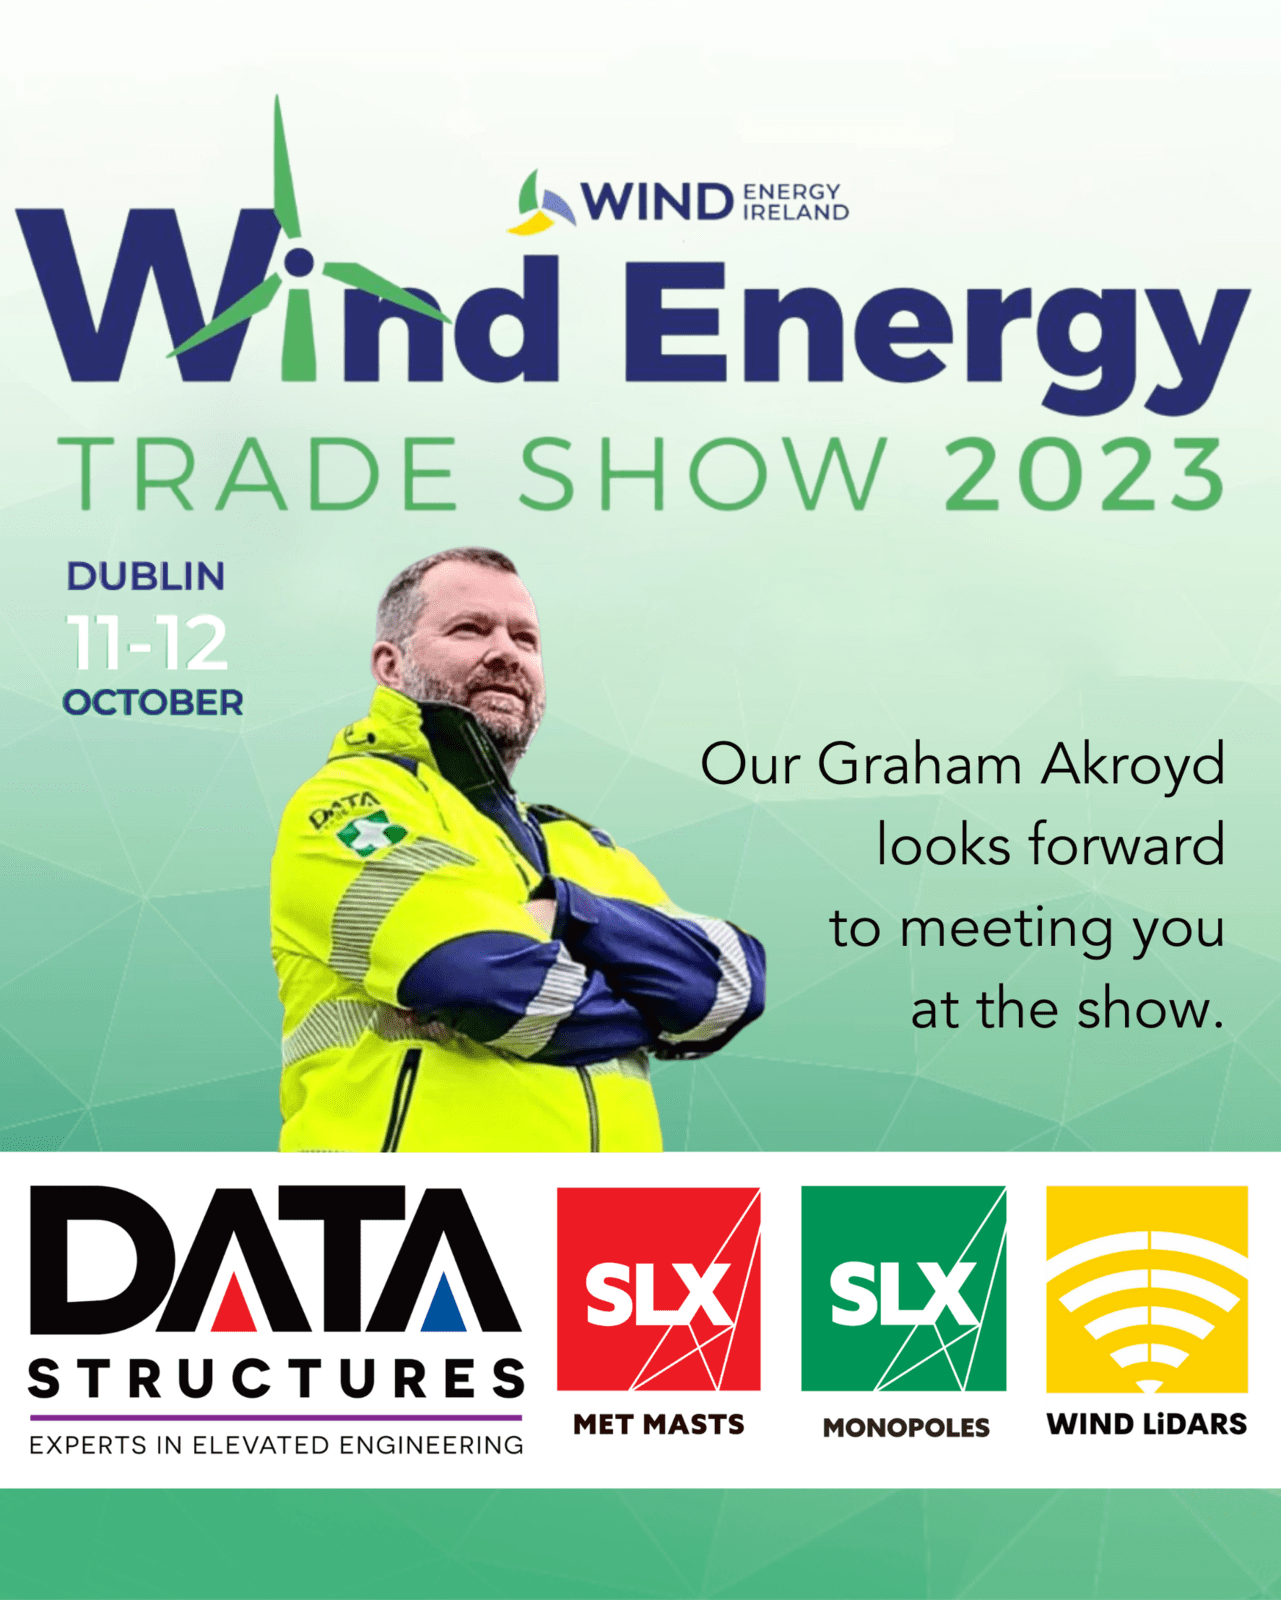 Data Structures @ Wind Energy Trade Show 2023